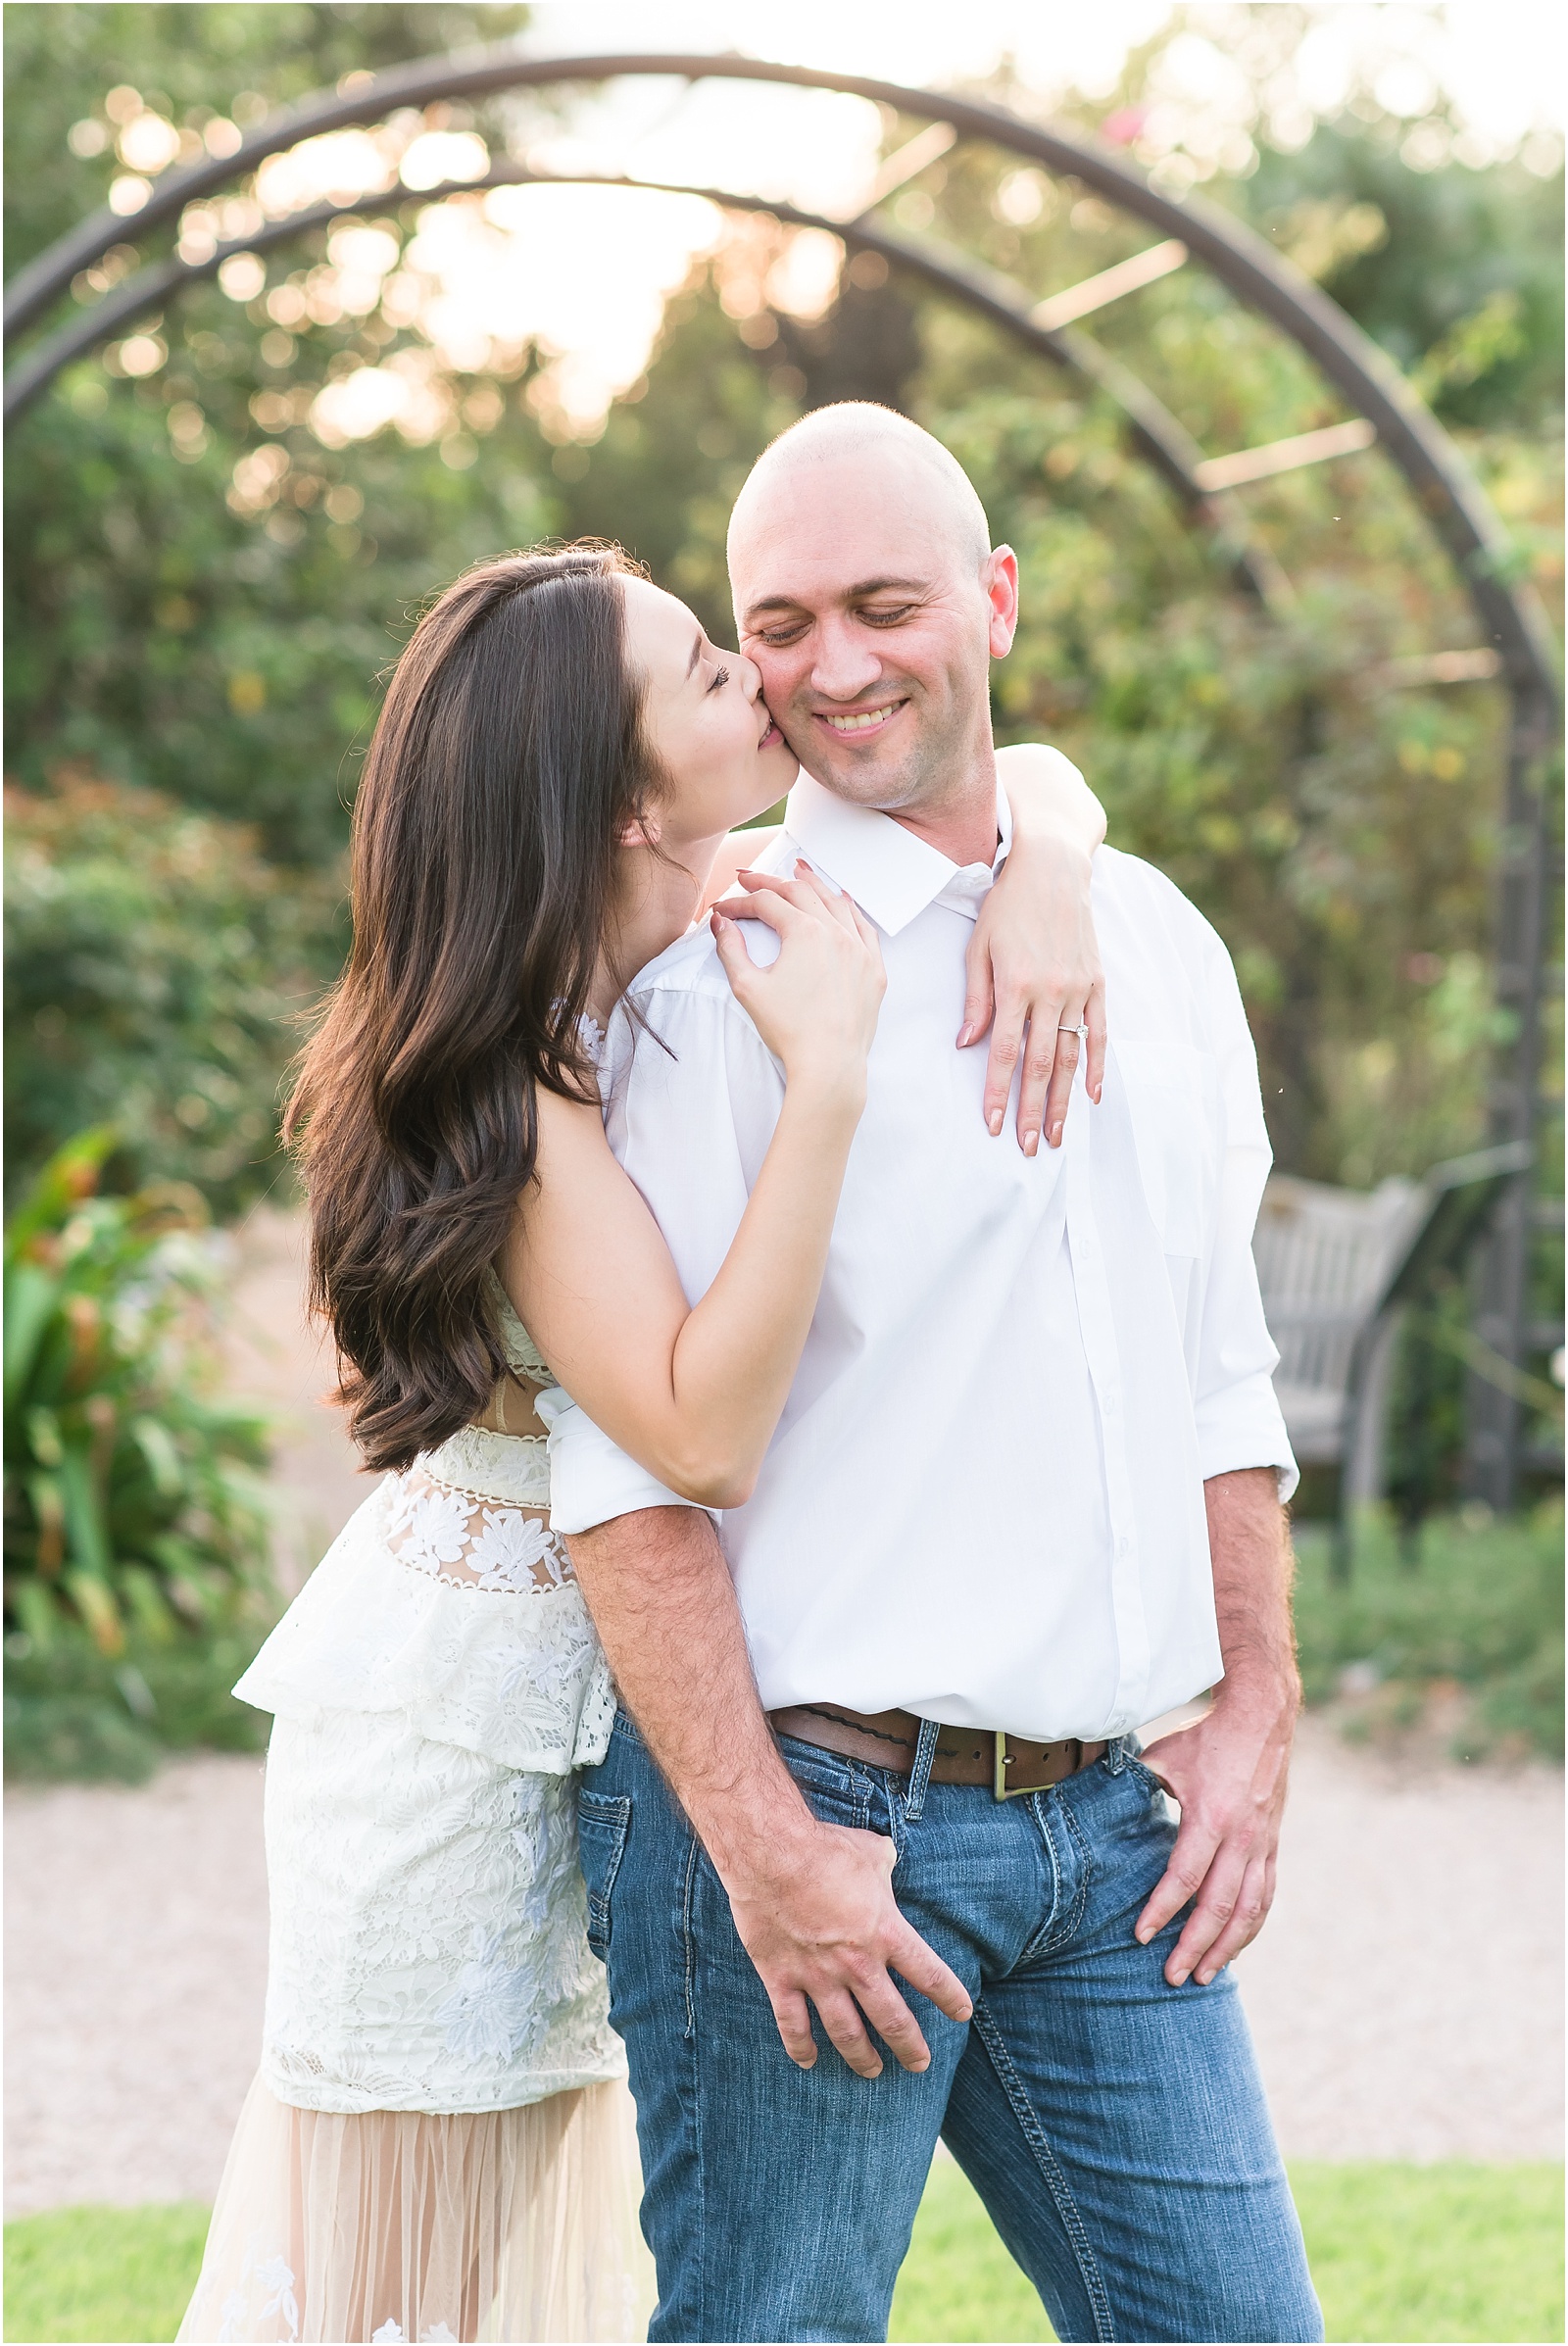 a women wearing a white dress hugging man wearing white shirt with dark blue jeans from behind kissing his check at JC Raulston Arboretum